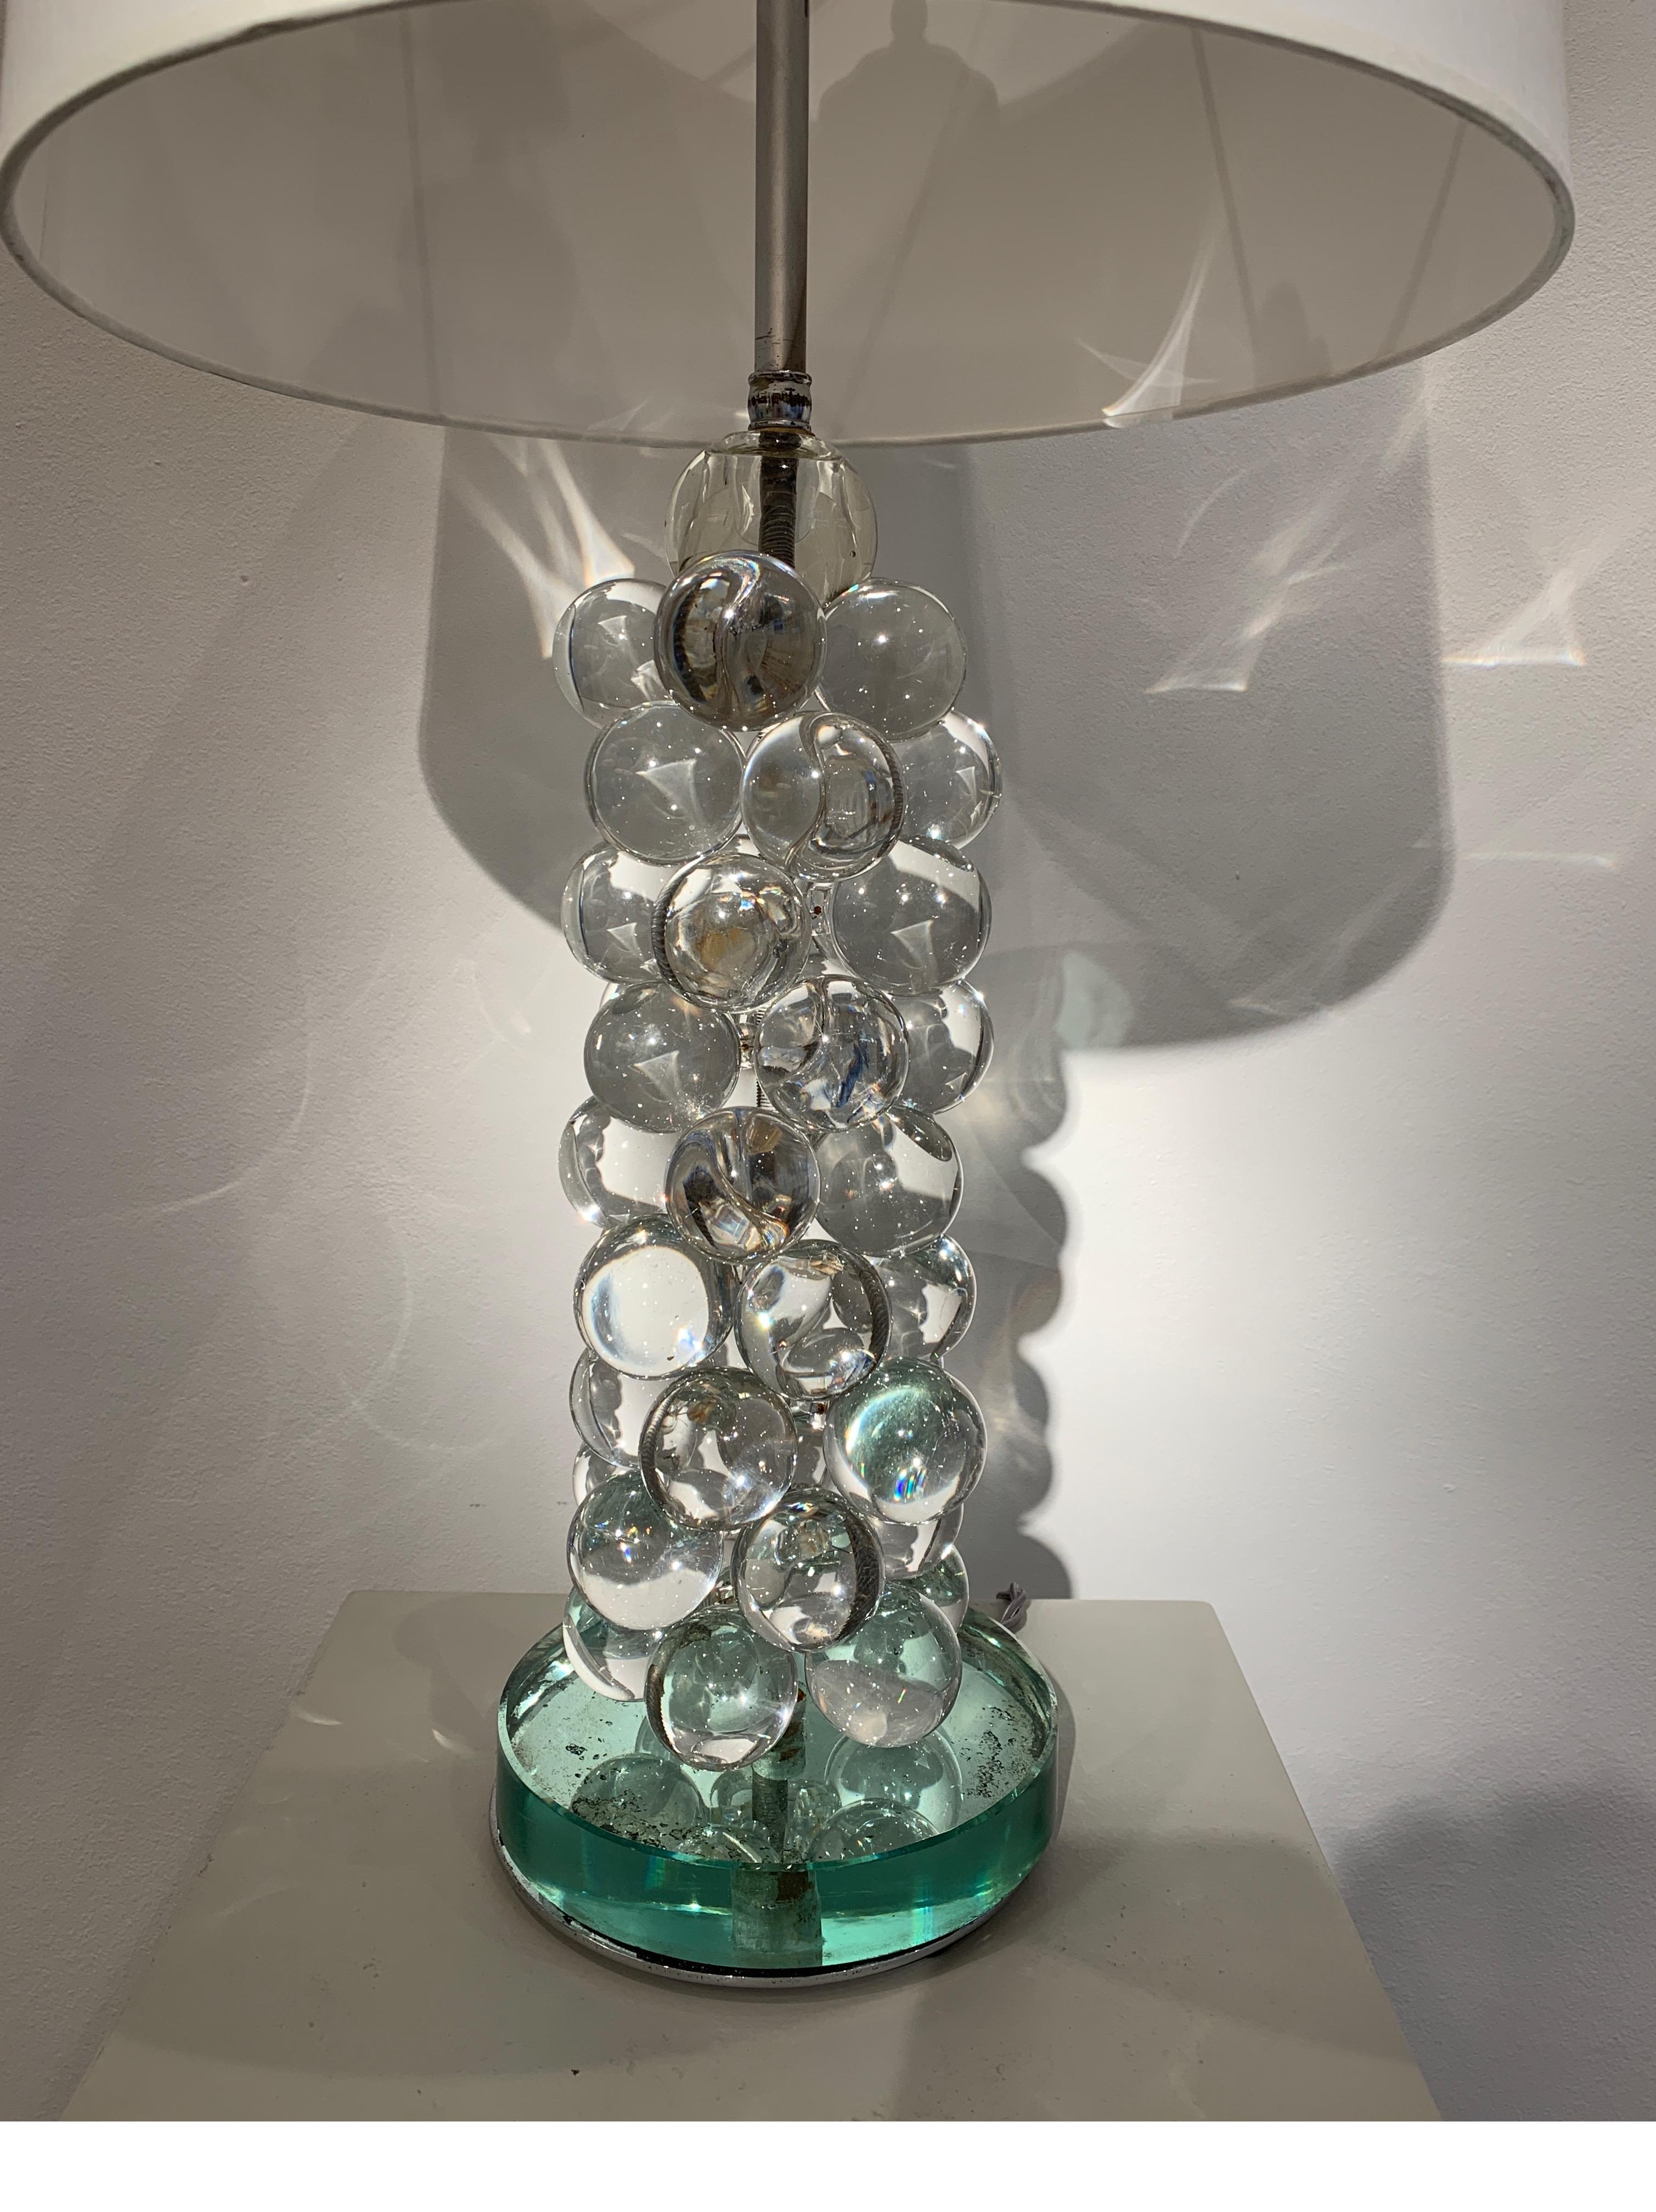 A decorative almost contemporary lamp. Created circa 2000, with glass beads. It achieves a highly decorative rendering.